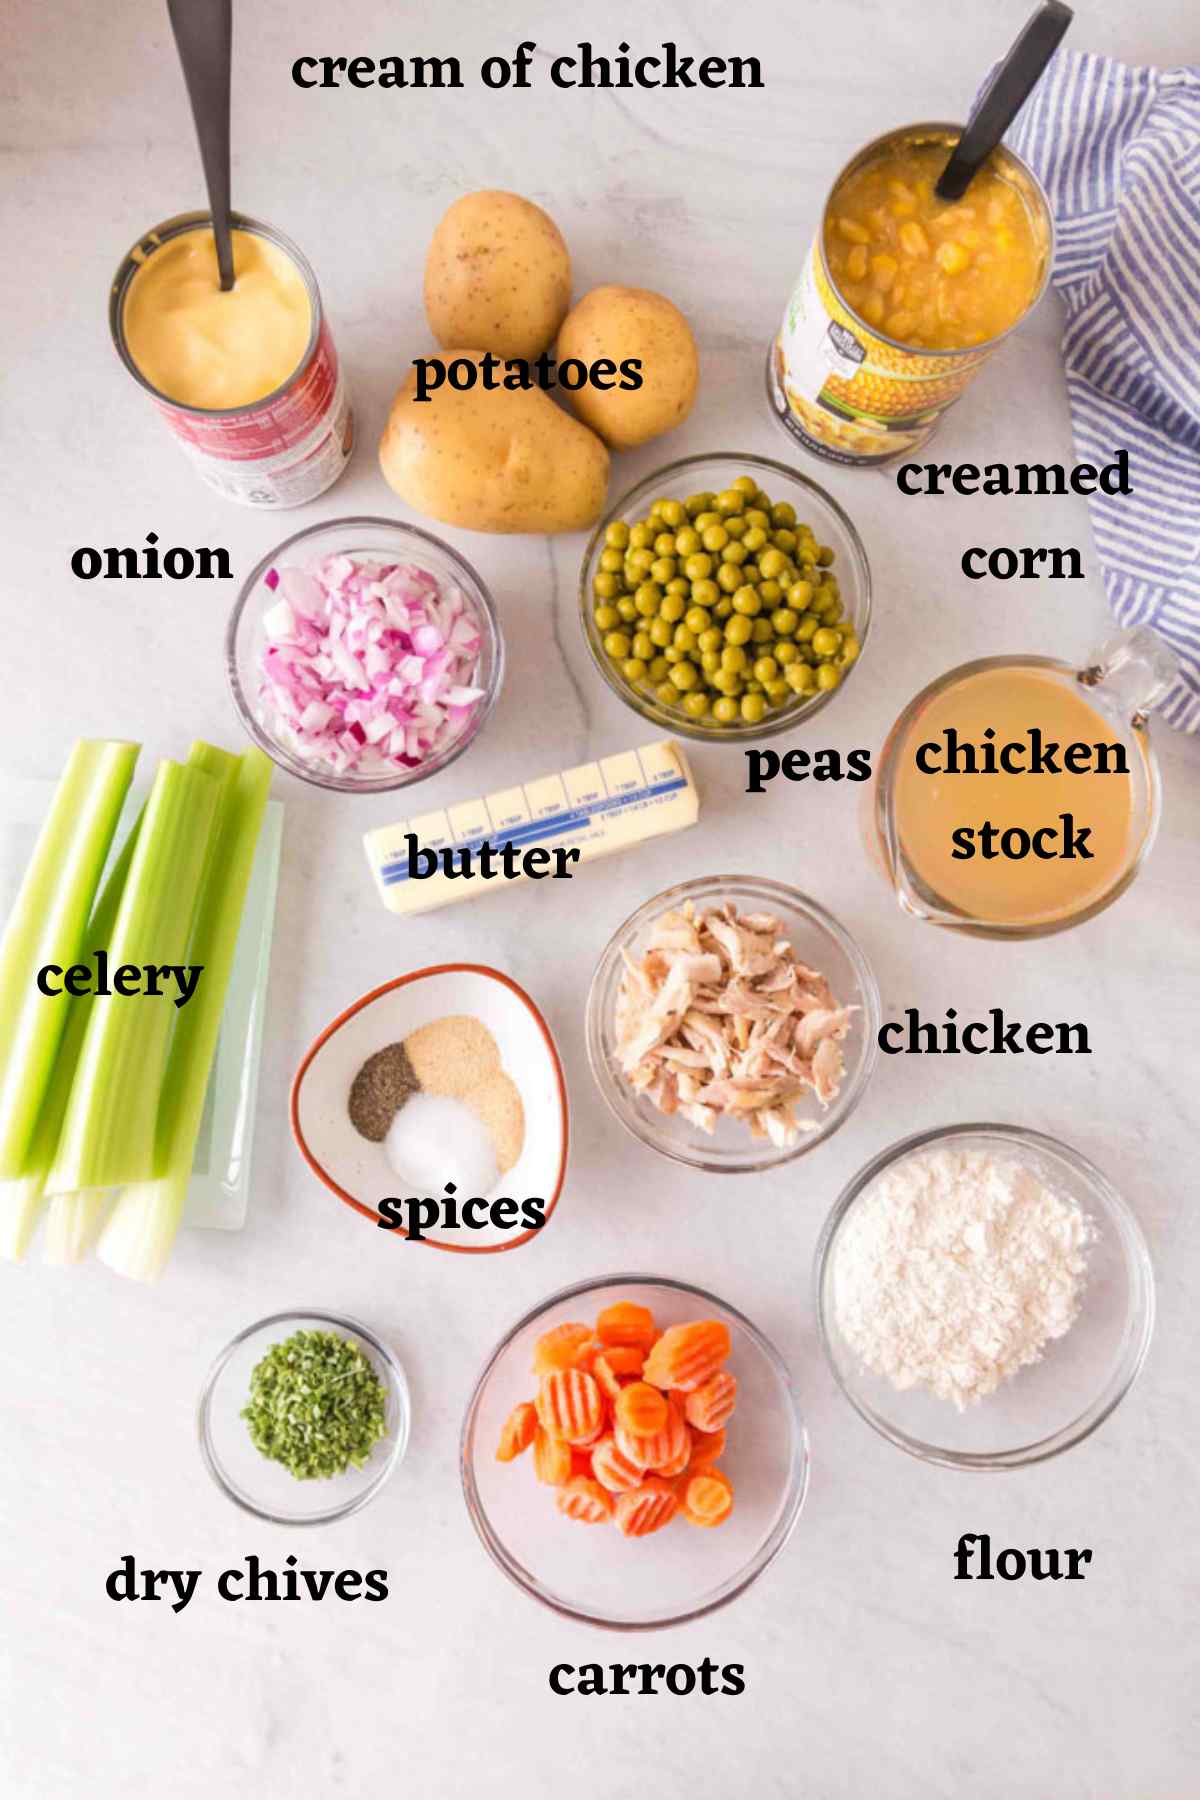 Ingredients to make chicken pot with soup with cream of chicken soup.